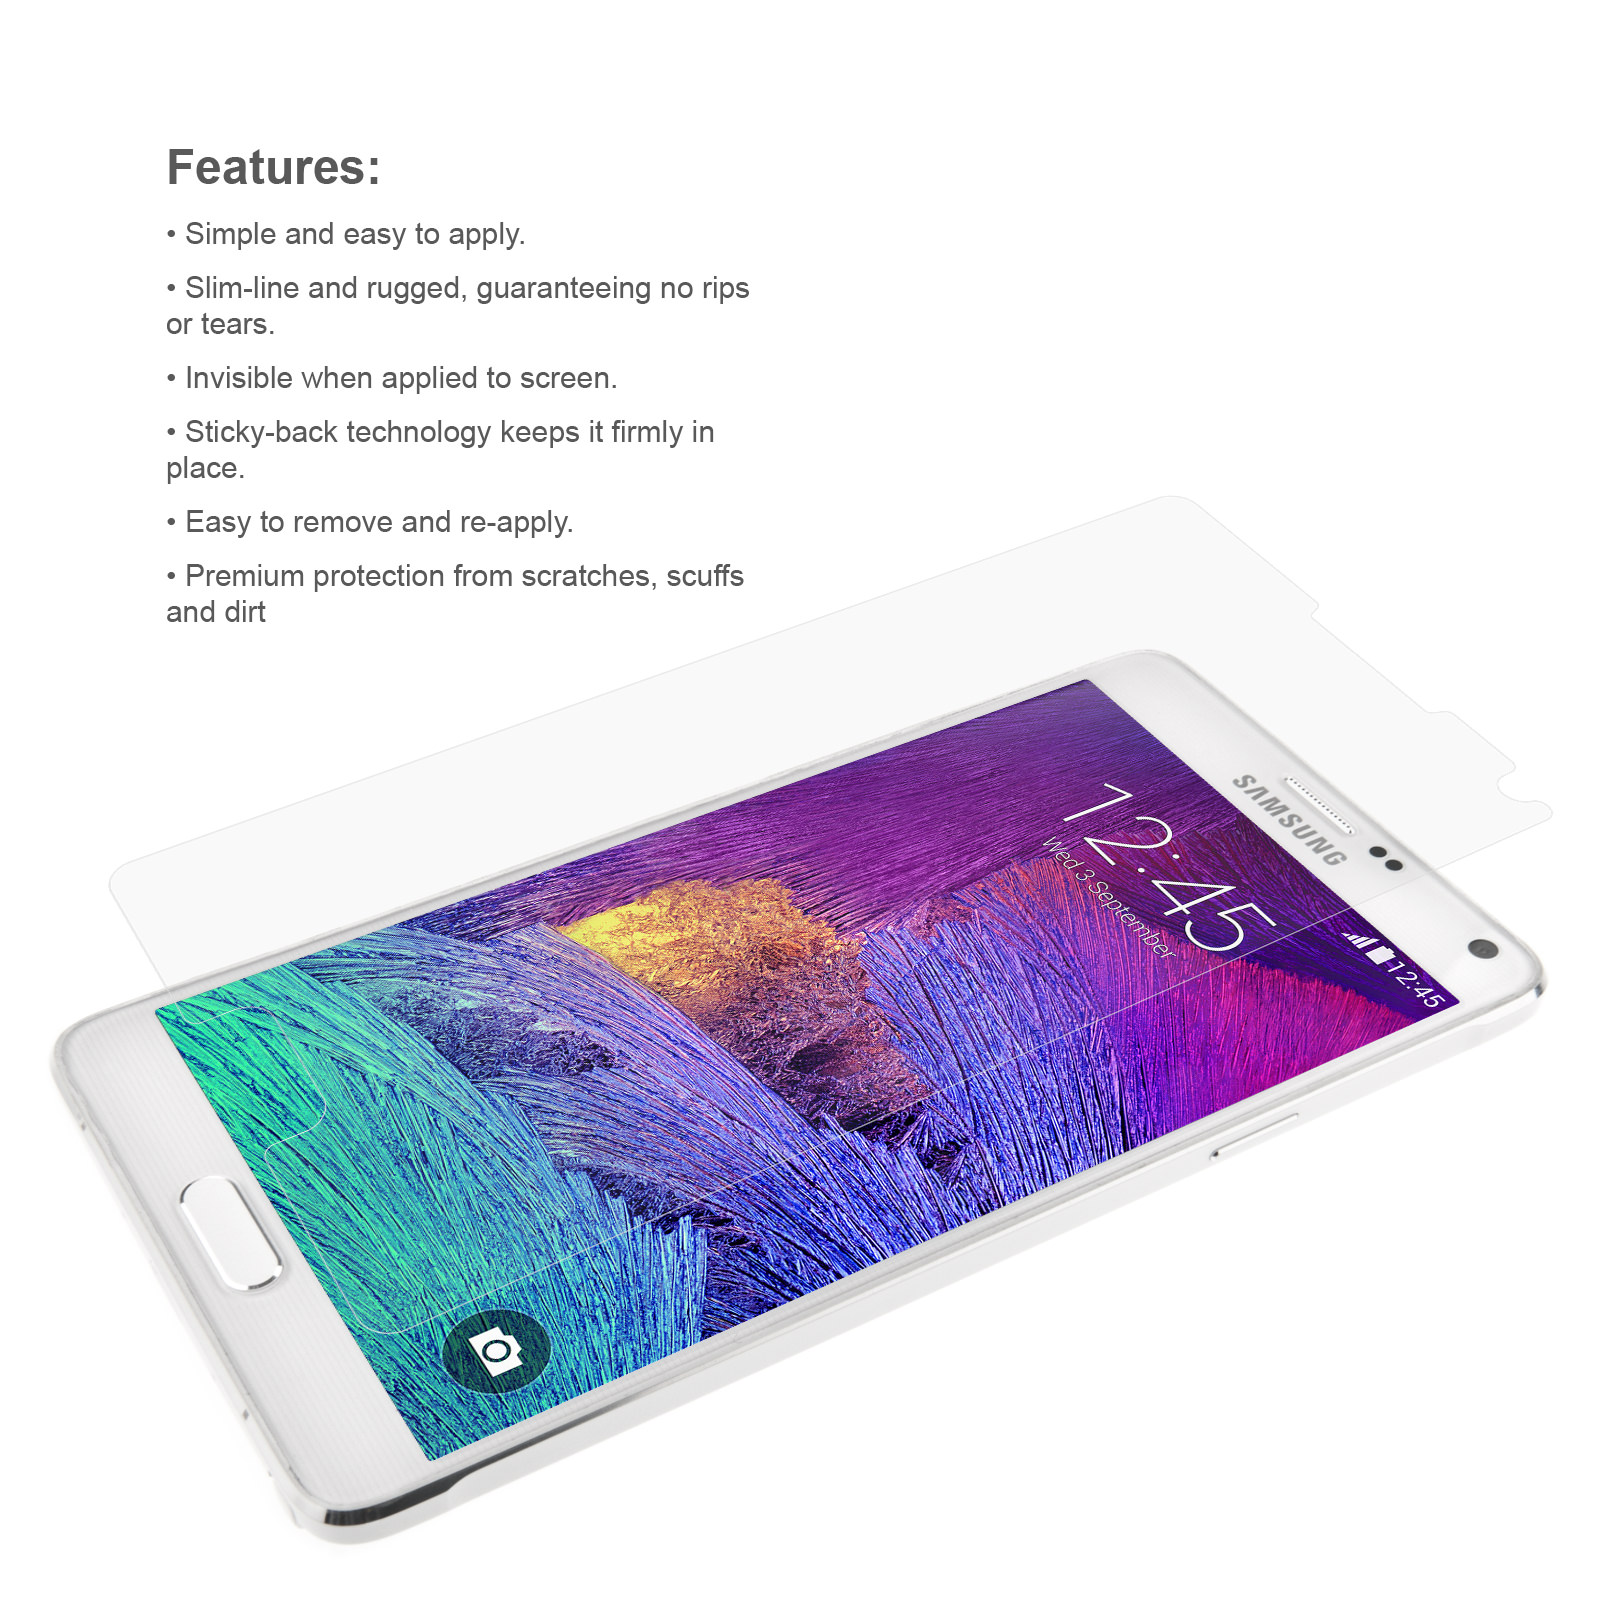 YouSave Accessories Samsung Galaxy Note 4 Screen Protectors x3